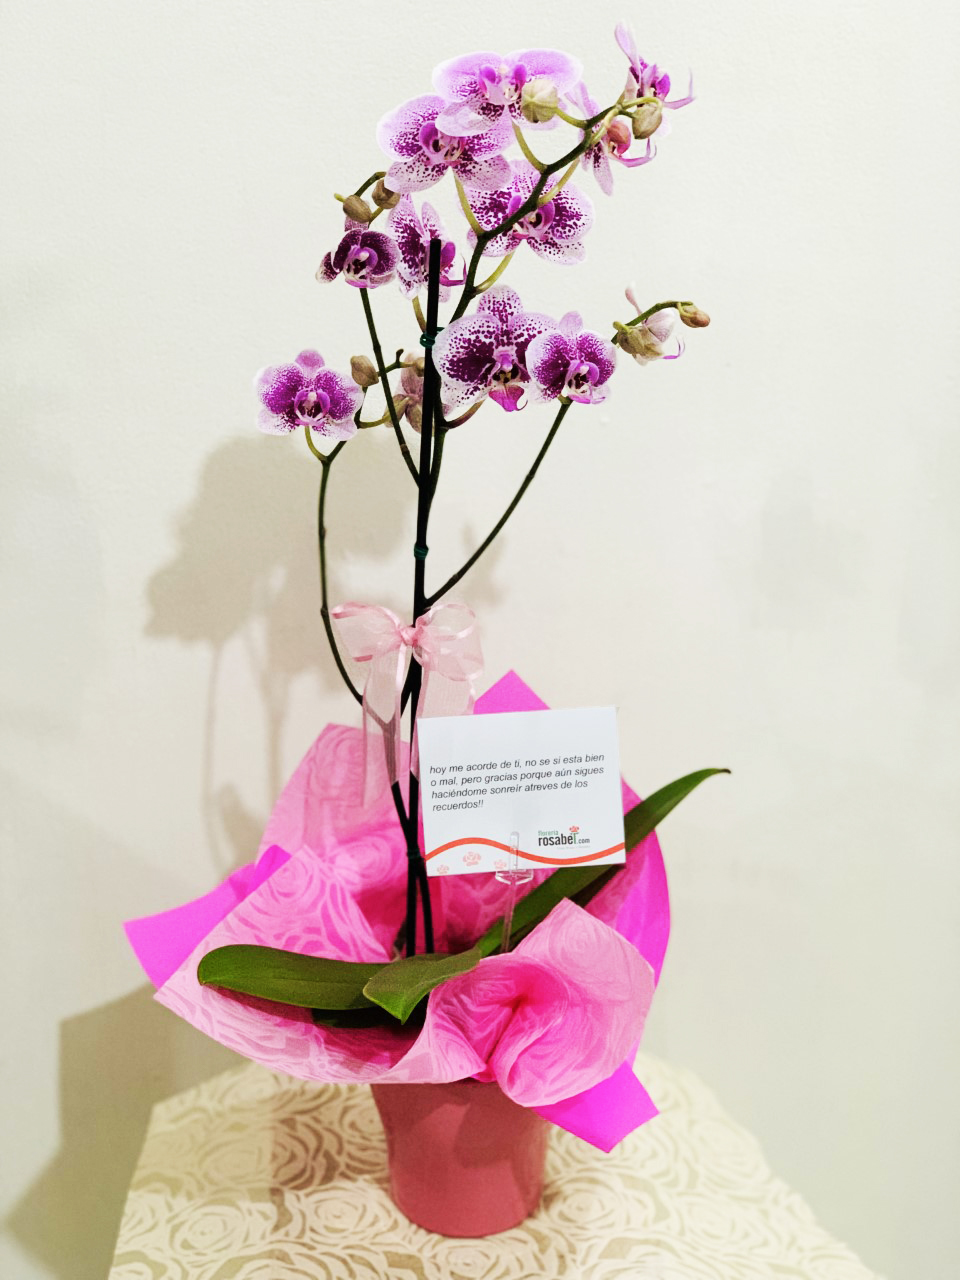 Our pink Variegated Phalaenopsis orchid with 8 to 12 flowers